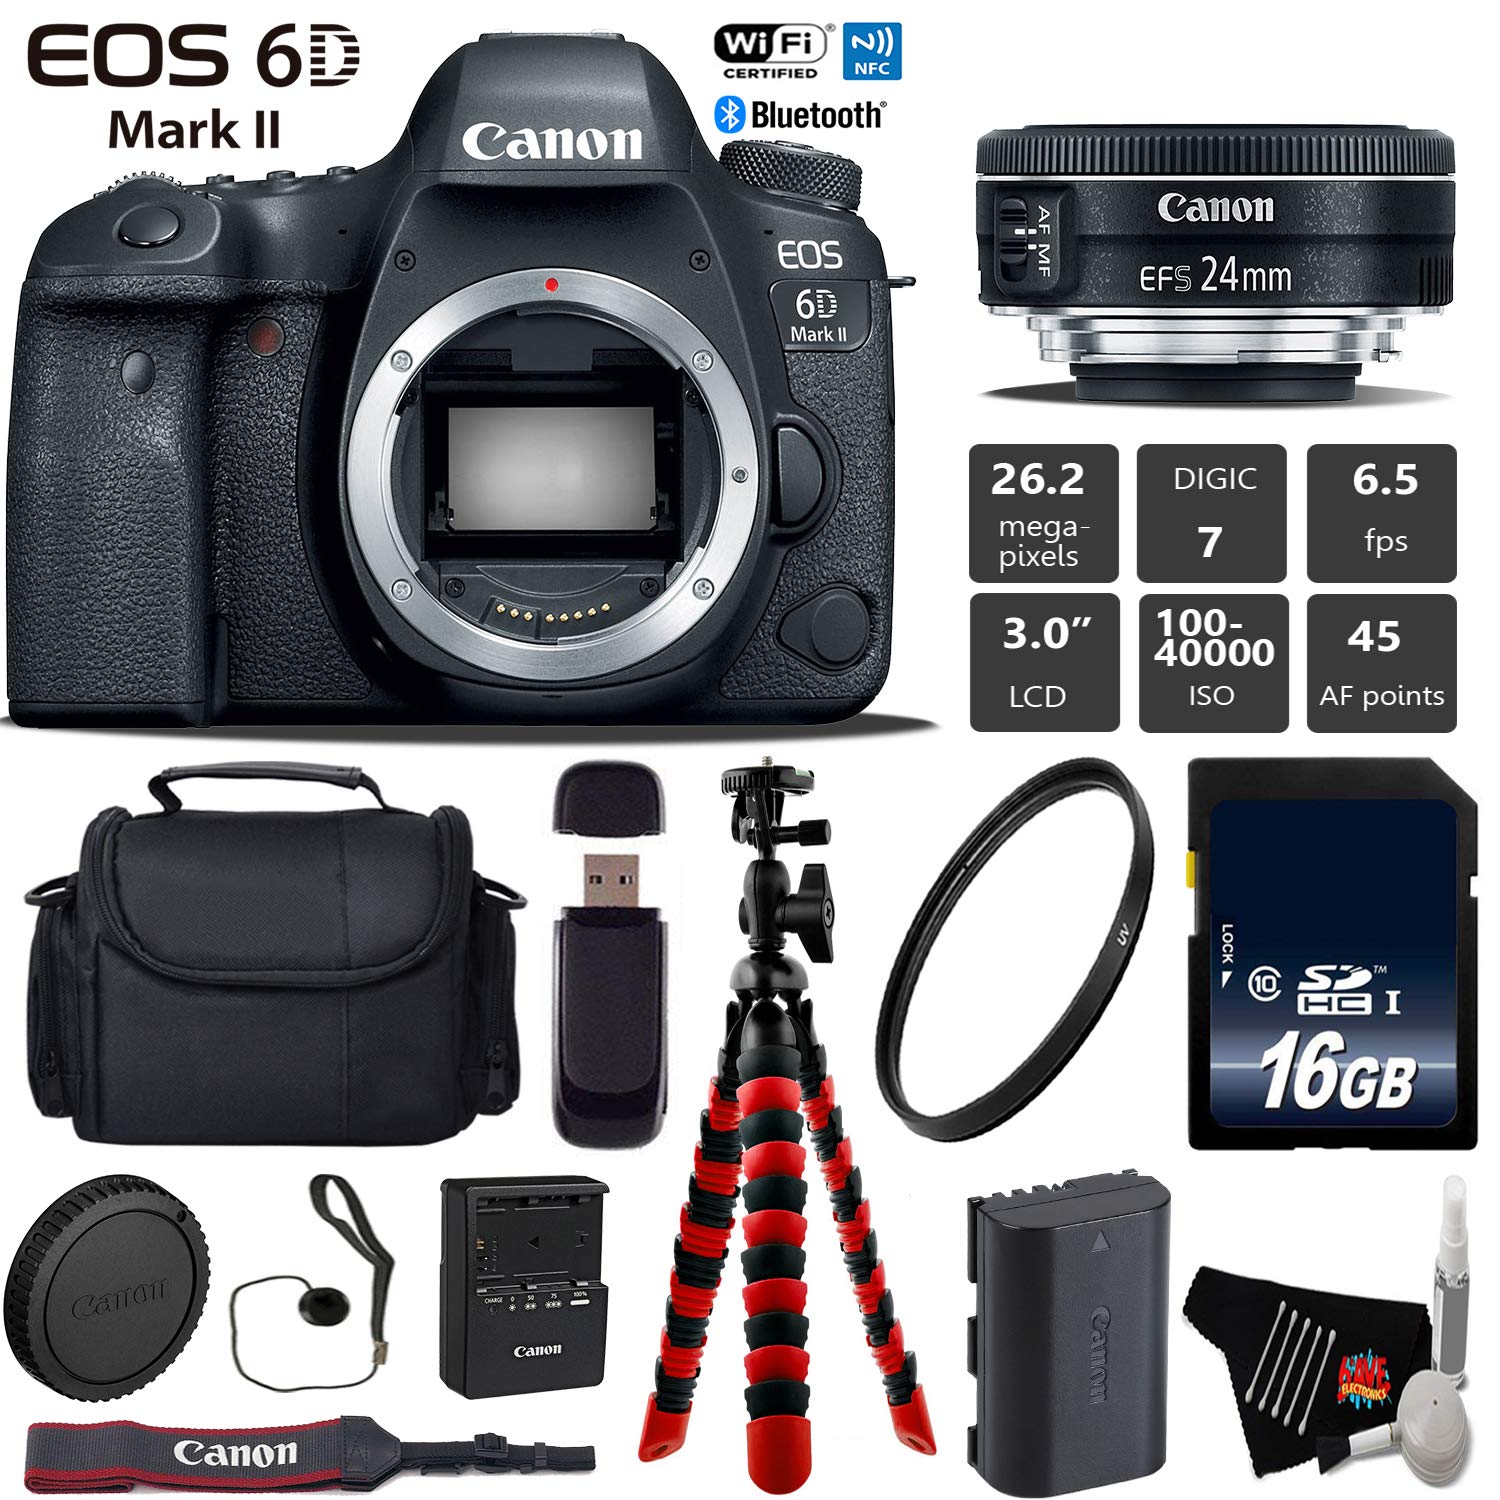 Canon EOS 6D Mark II DSLR Camera with 24mm f/2.8 STM Lens + Wireless Remote + UV Protection Filter + Case + Wrist Strap Base Bundle